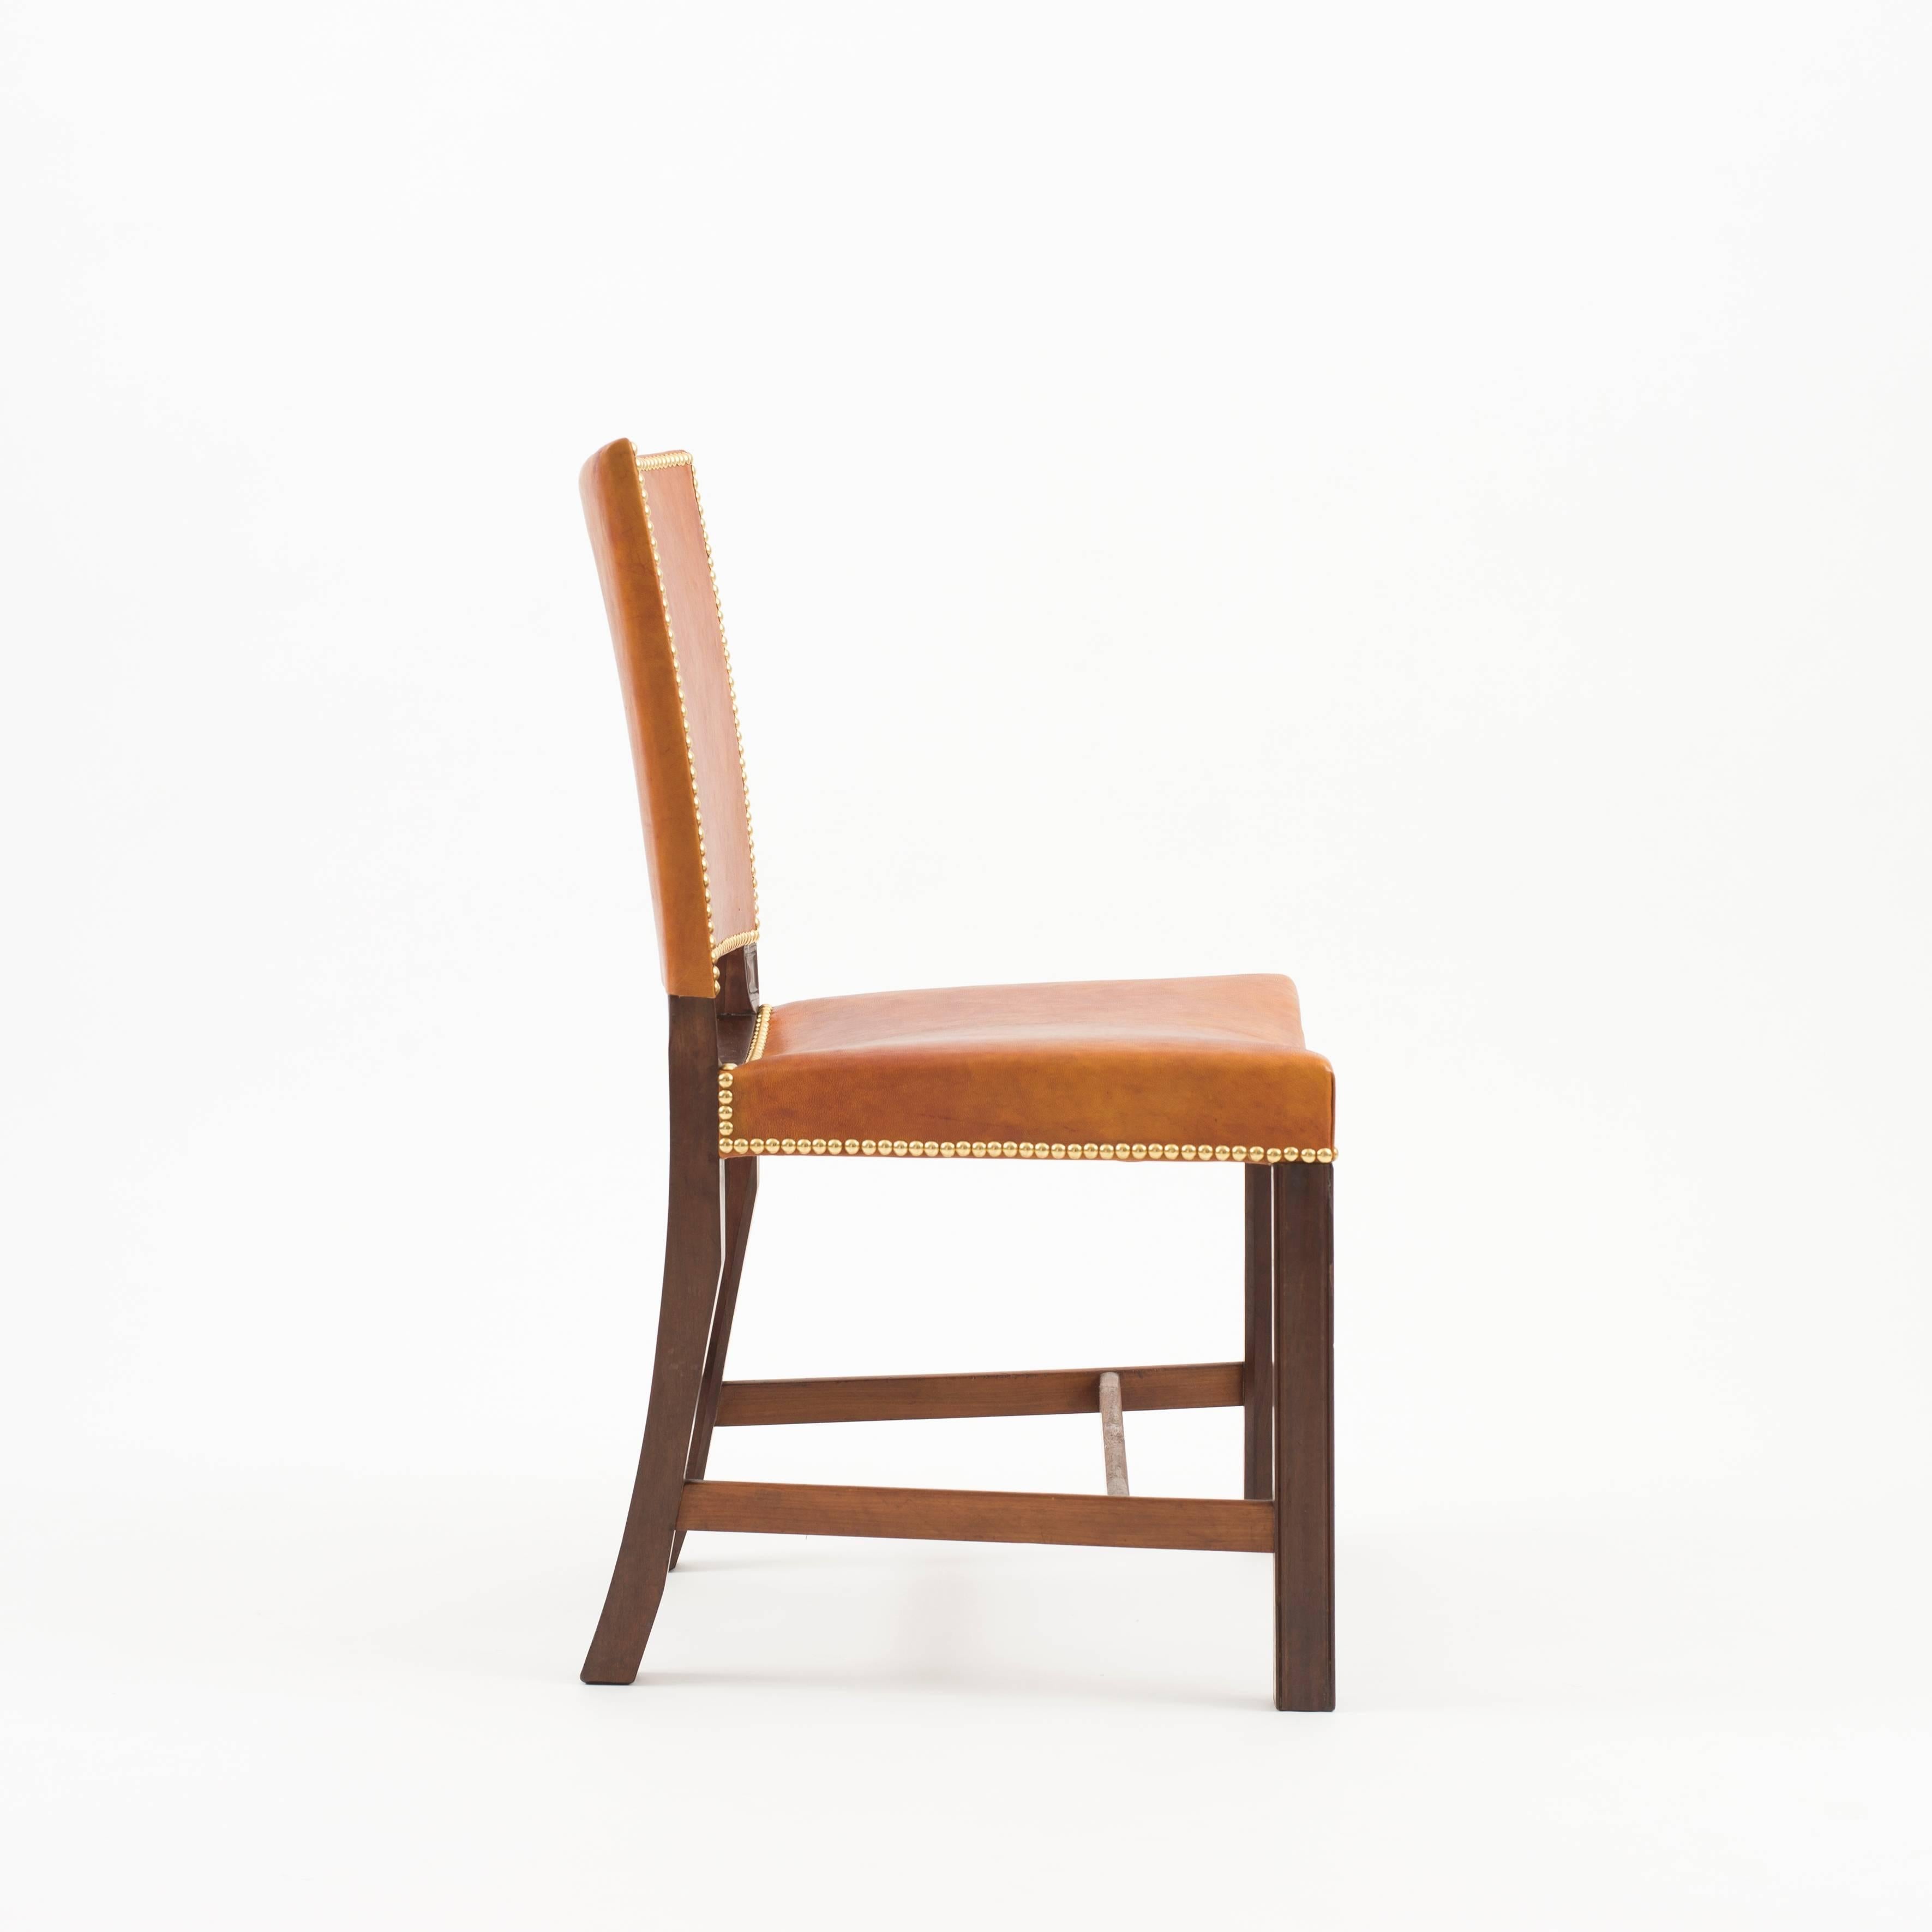 Scandinavian Modern Kaare Klint Red Chair in Cuban Mahogany and Niger Leather, 1928